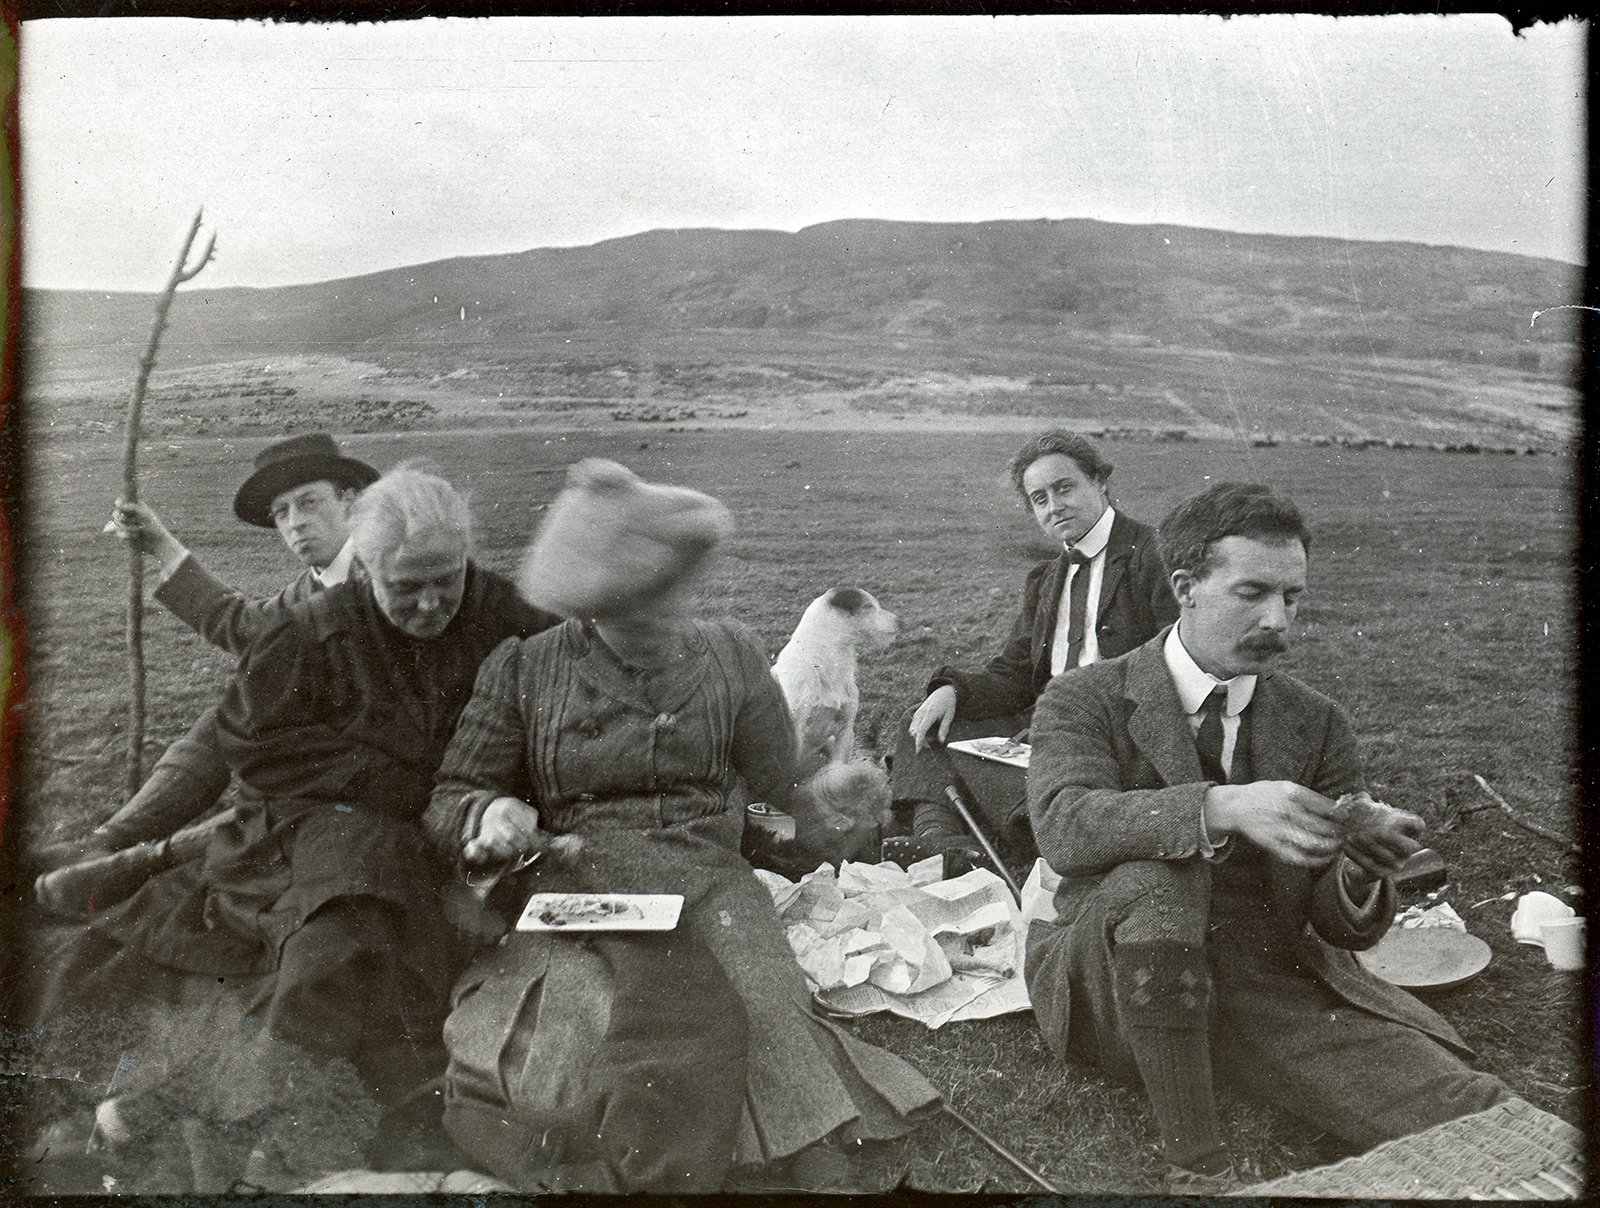 Barton-Childers family picnic on Scarr, Wicklow, 1912.